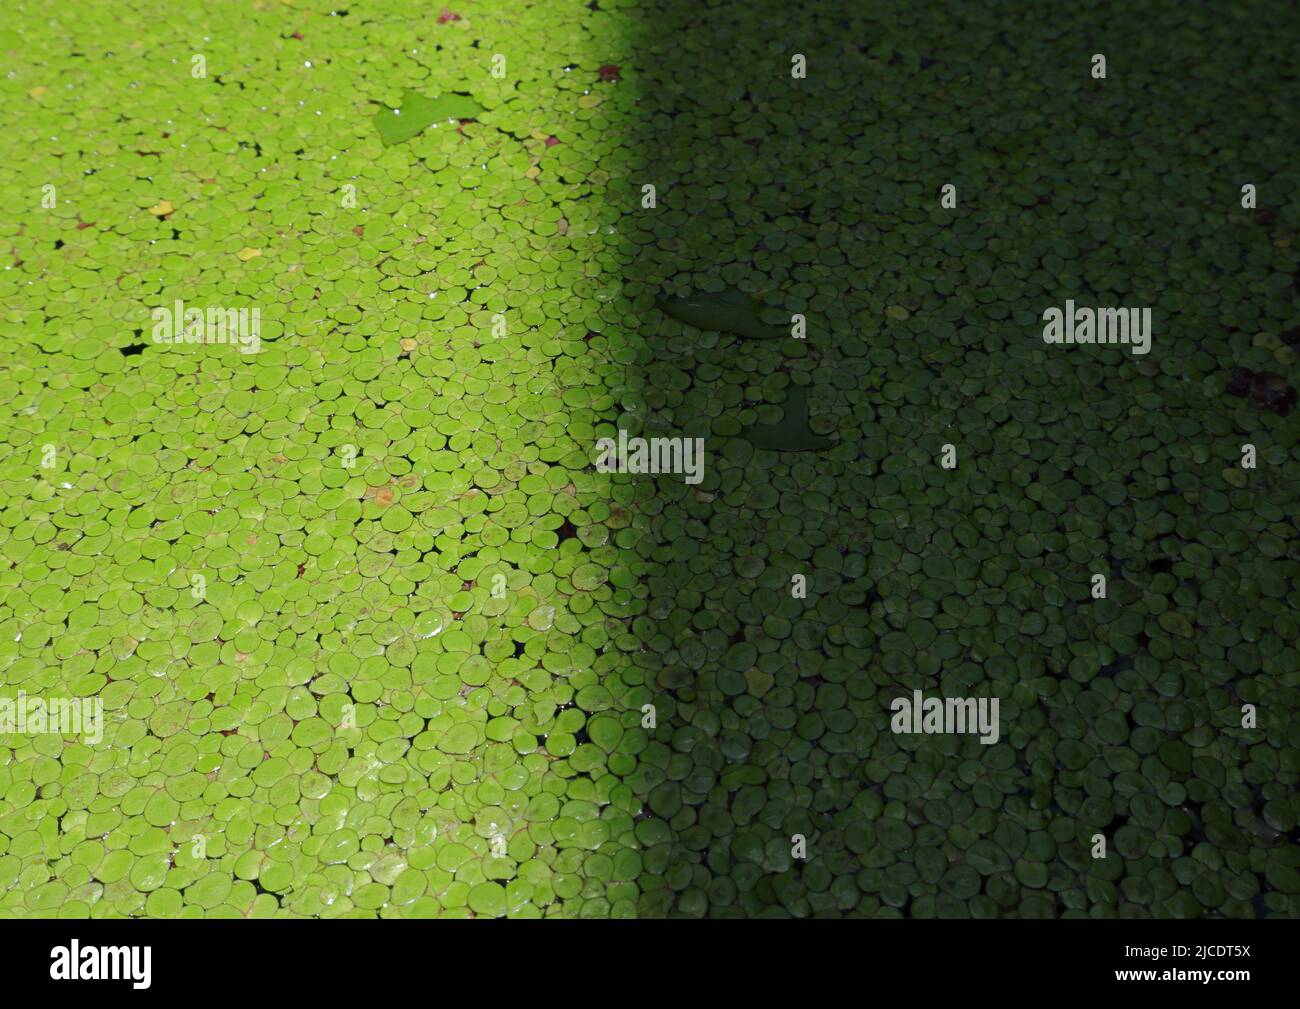 sunlight and shadow at the same time in a pond covered with floating common duckweed (Spirodela polyrhiza) plants Stock Photo